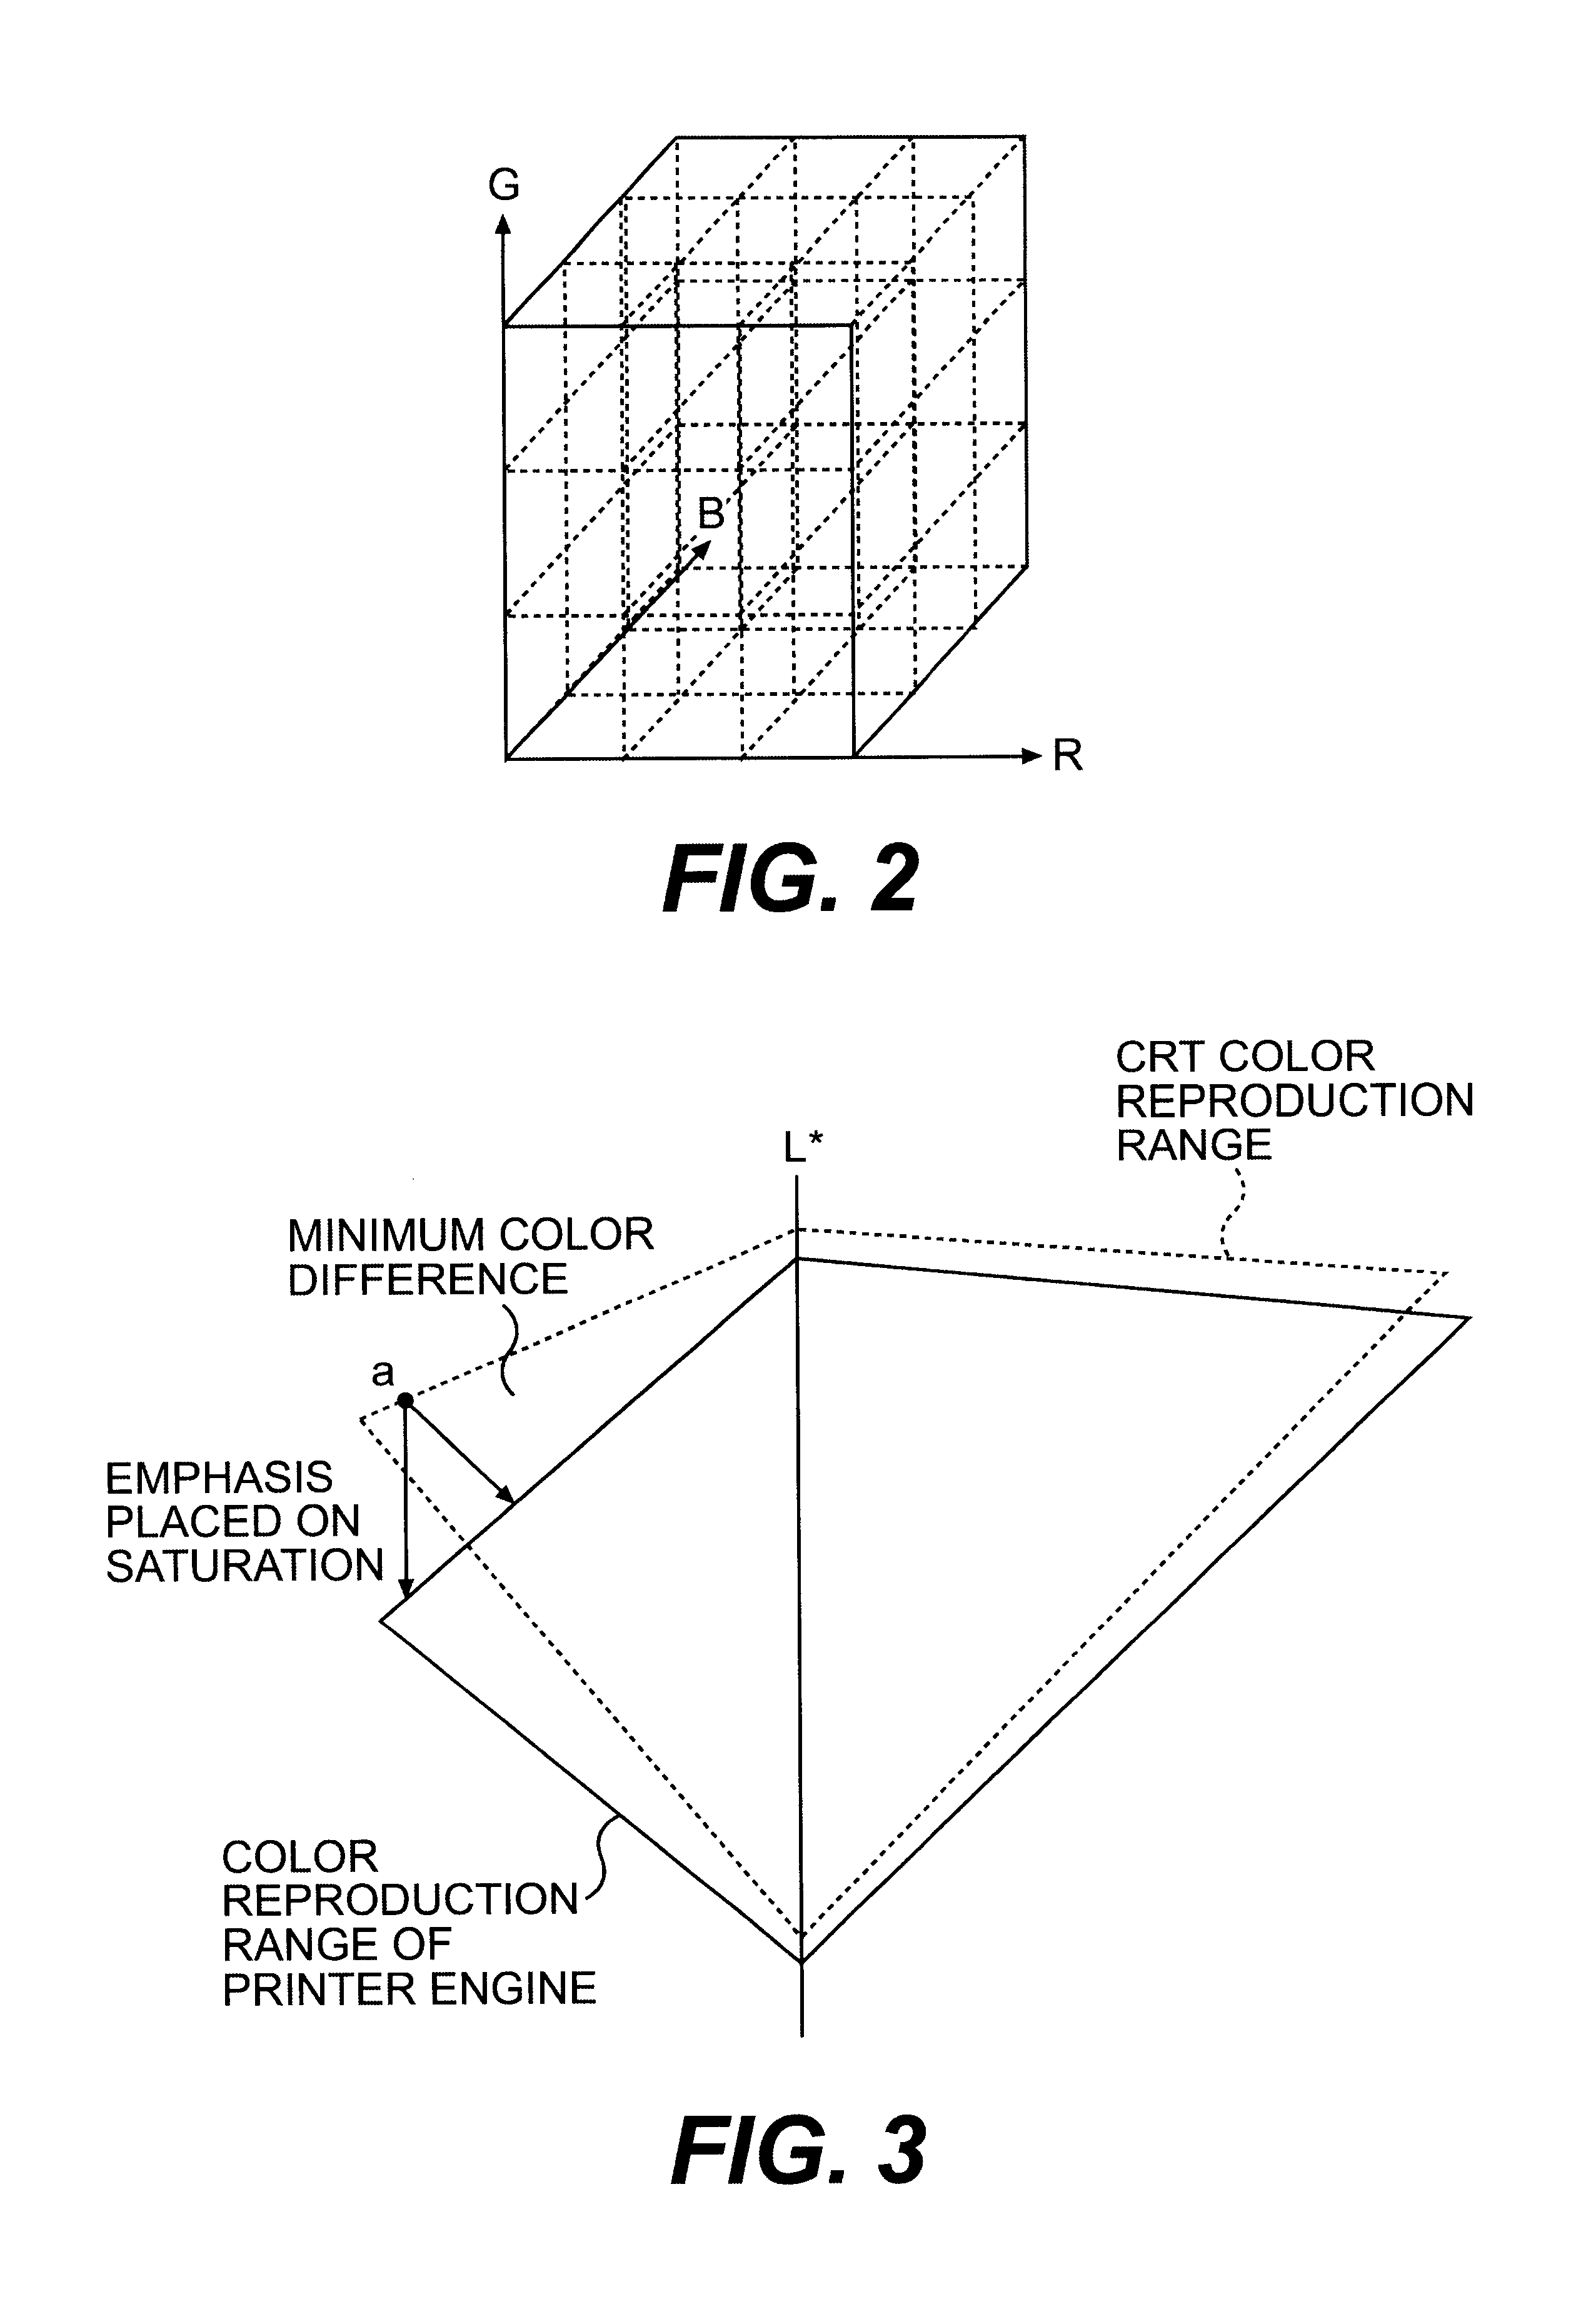 Image forming apparatus which sets parameters for the formation of paper